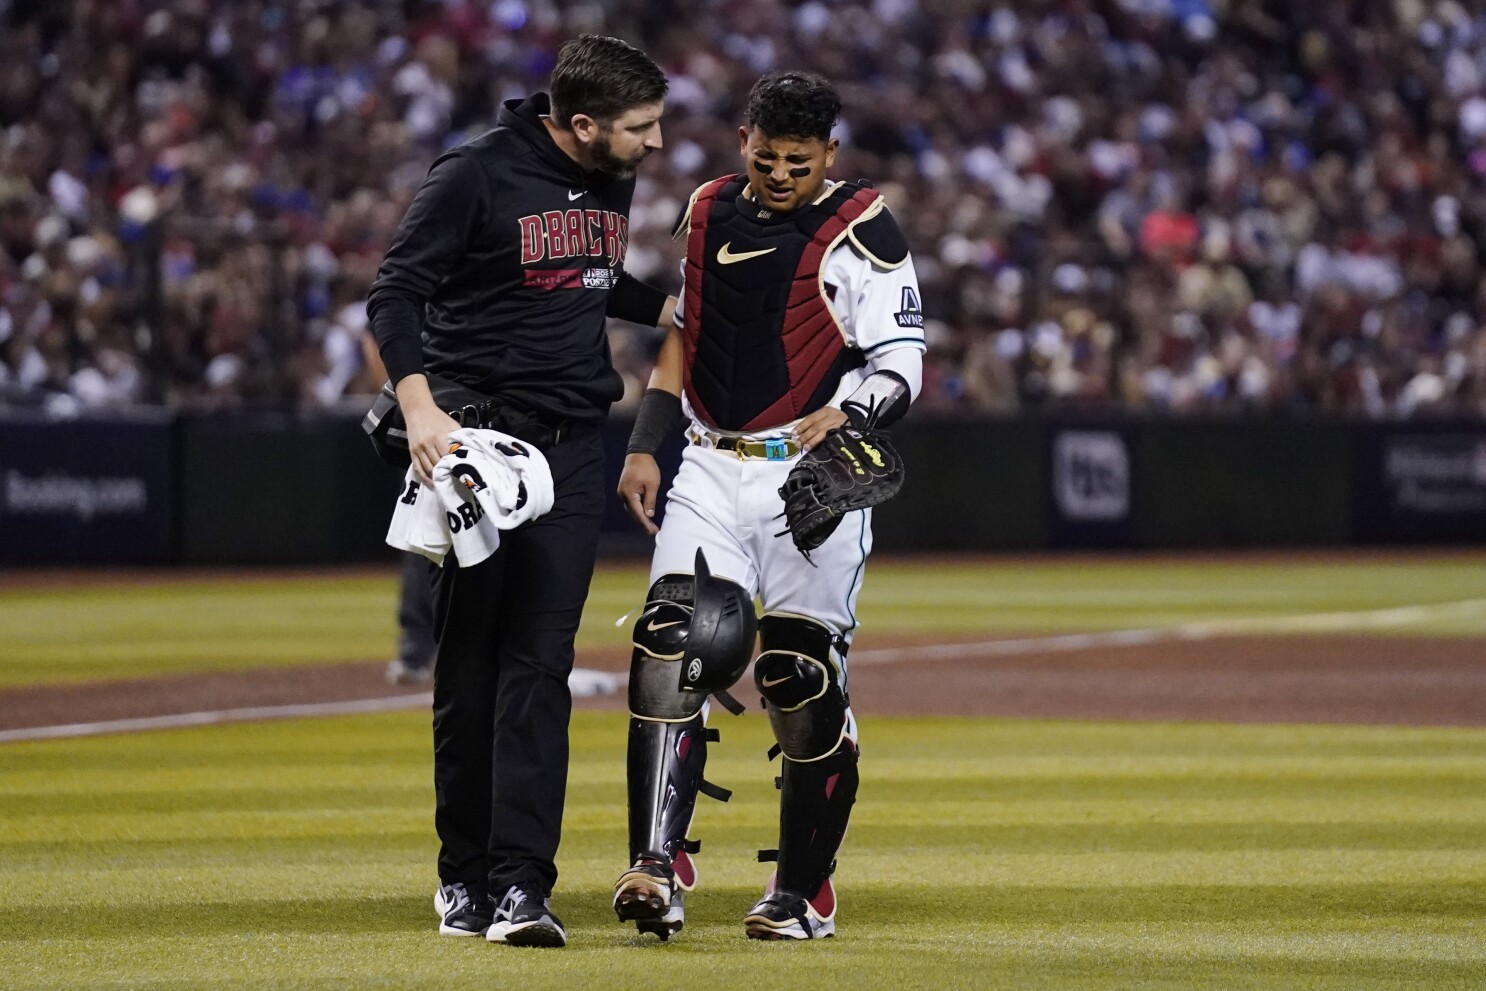 Diamondbacks' Gabriel Moreno day-to-day after hand hit by foul tip